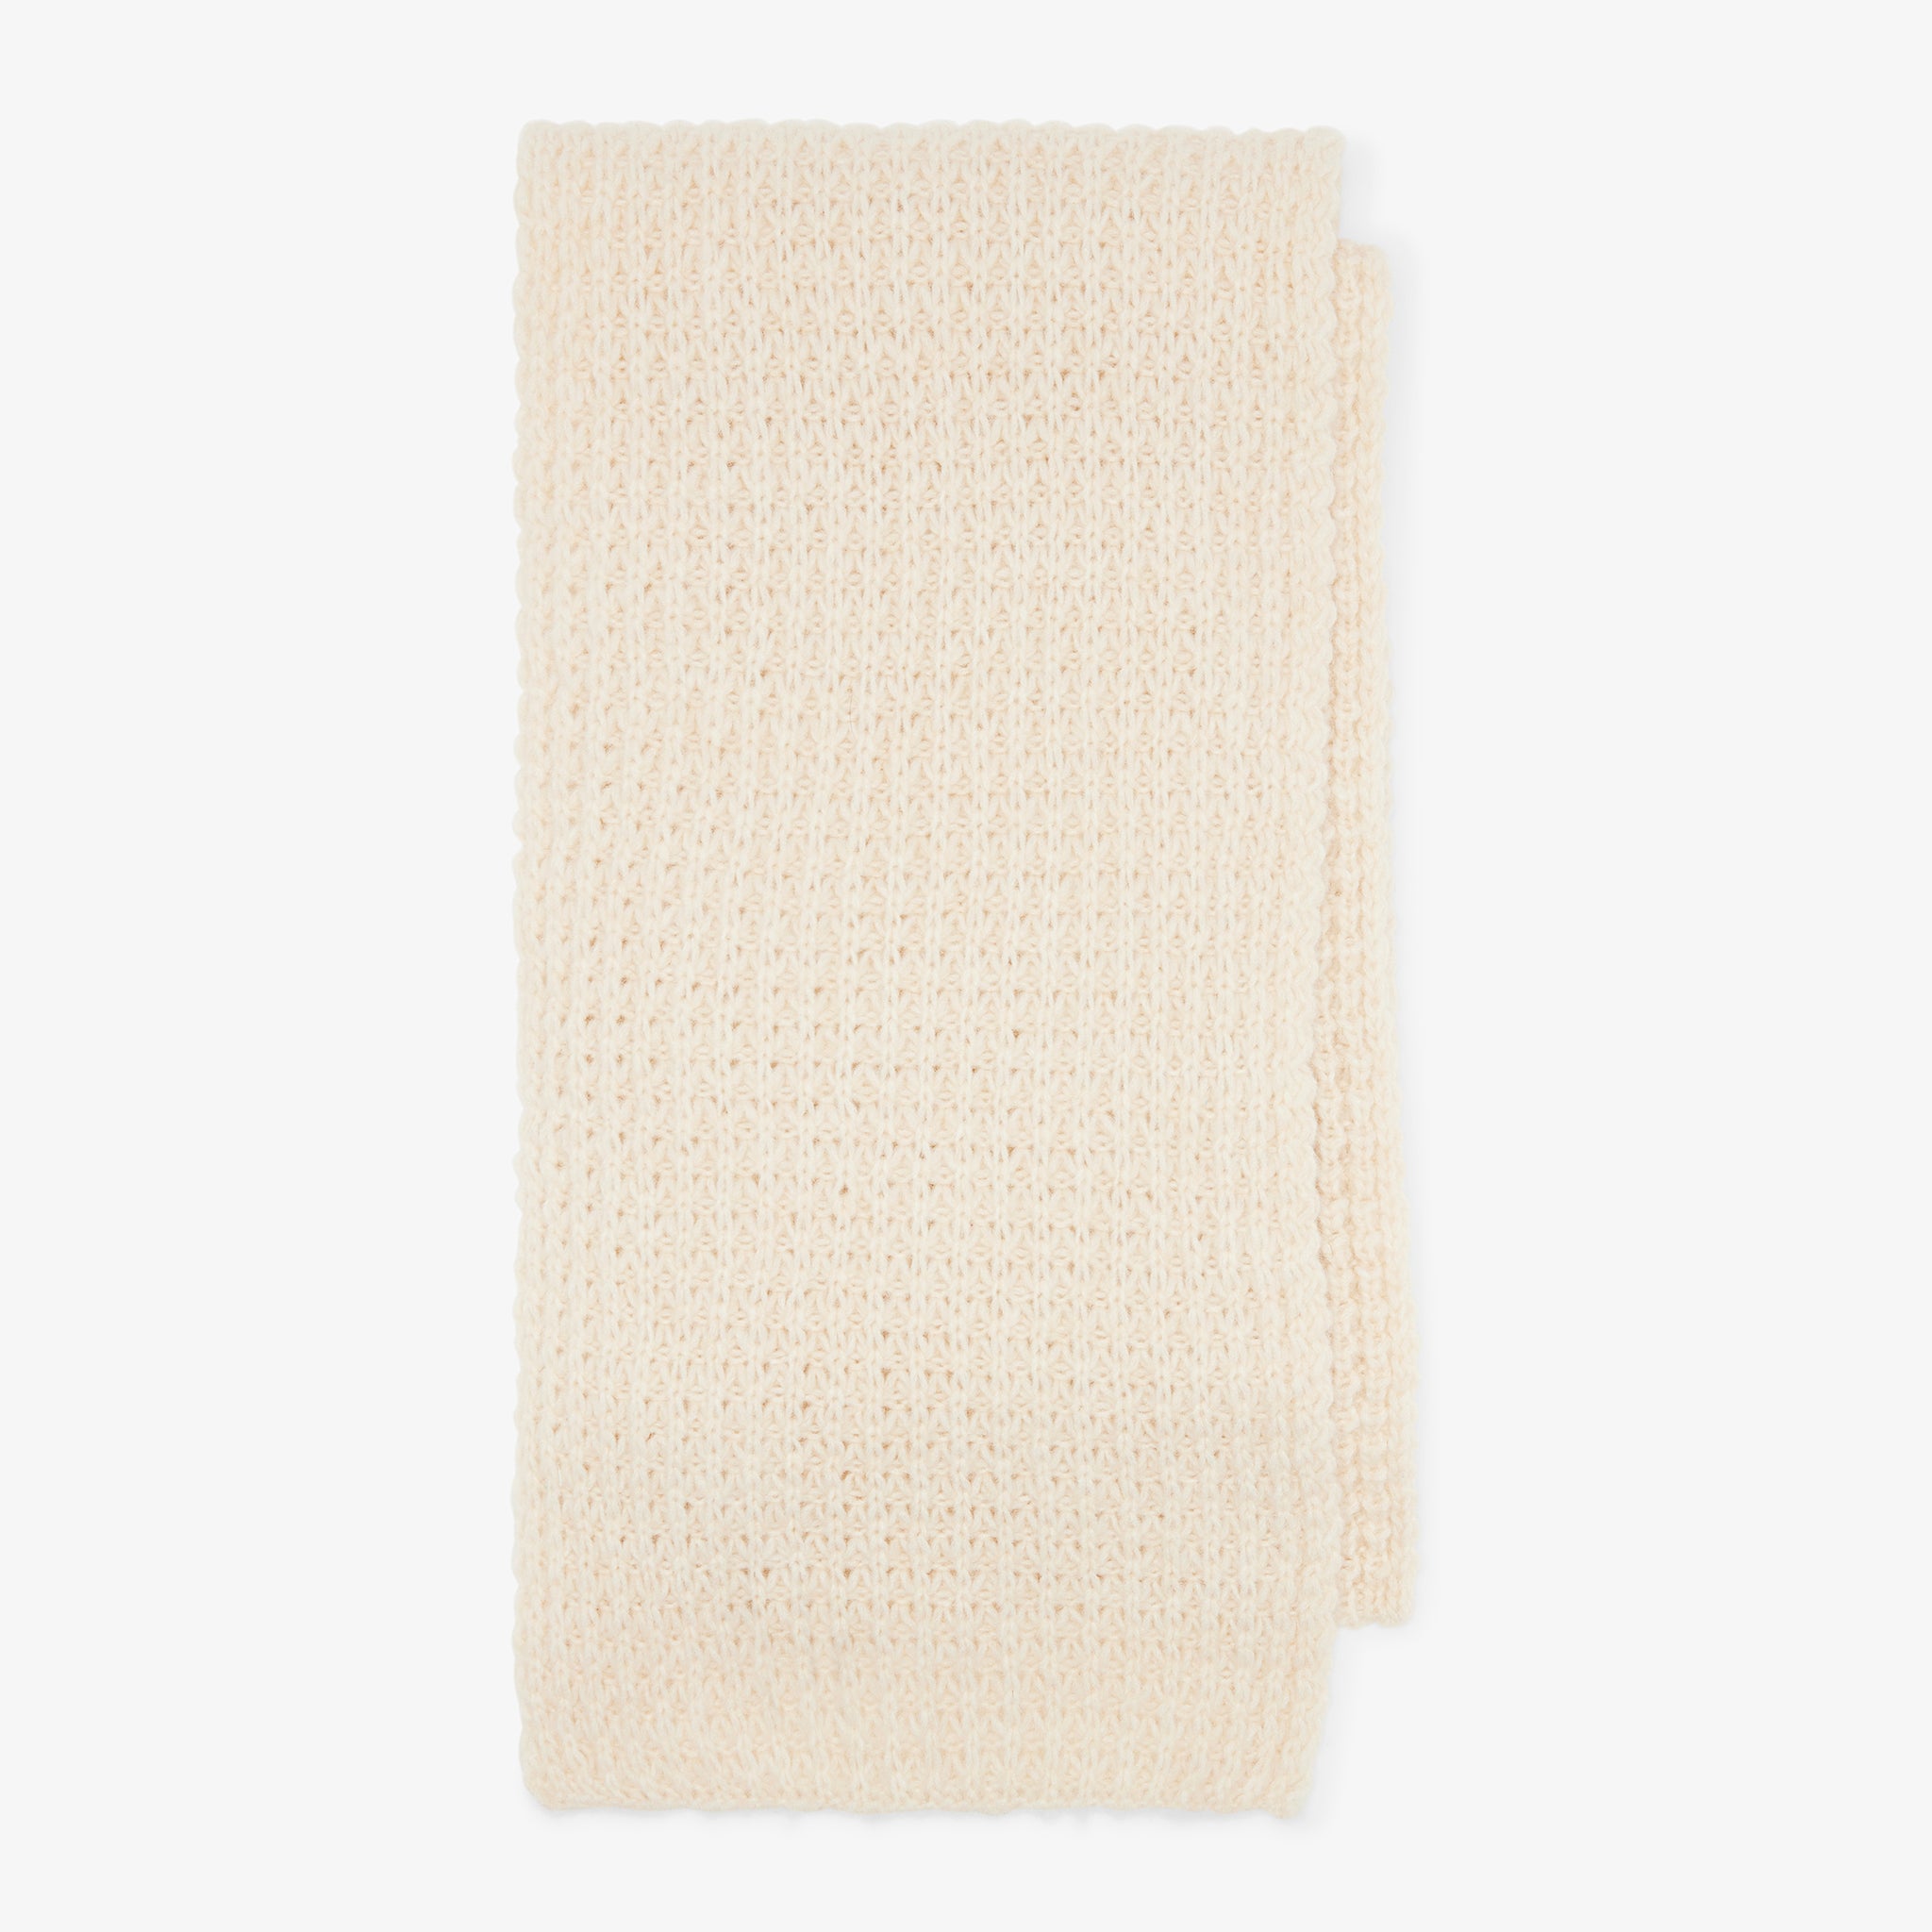 Packshot image of the scarf in ivory 